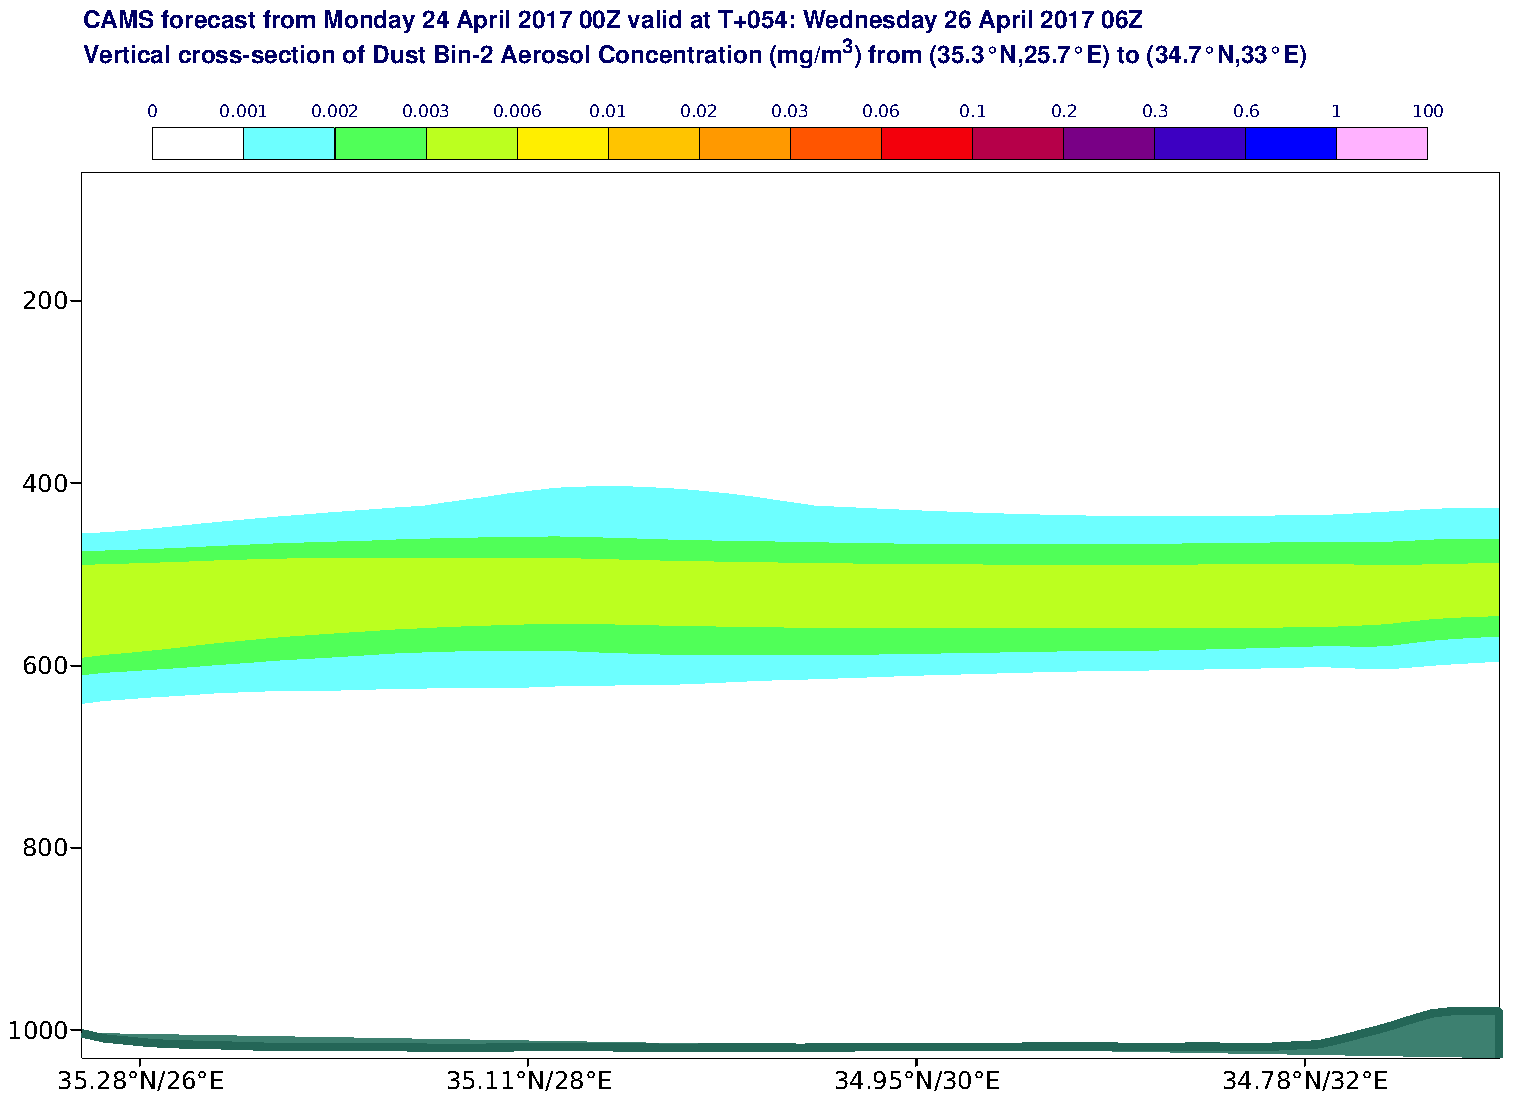 Vertical cross-section of Dust Bin-2 Aerosol Concentration (mg/m3) valid at T54 - 2017-04-26 06:00